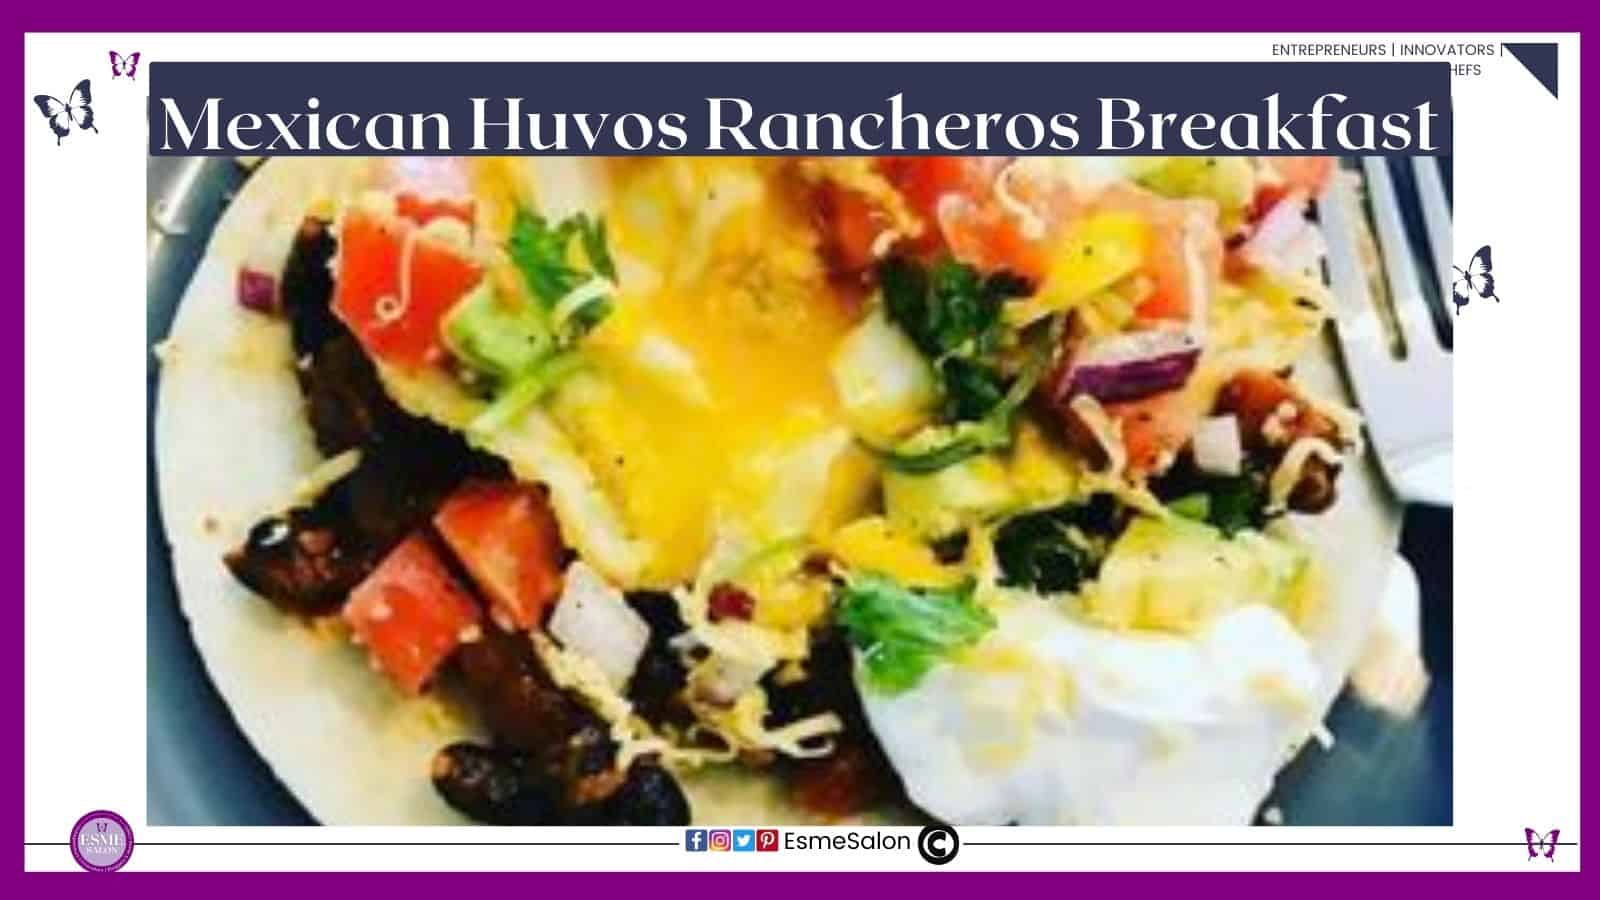 an image of a plate filled with a Mexican Huvos Rancheros Breakfast